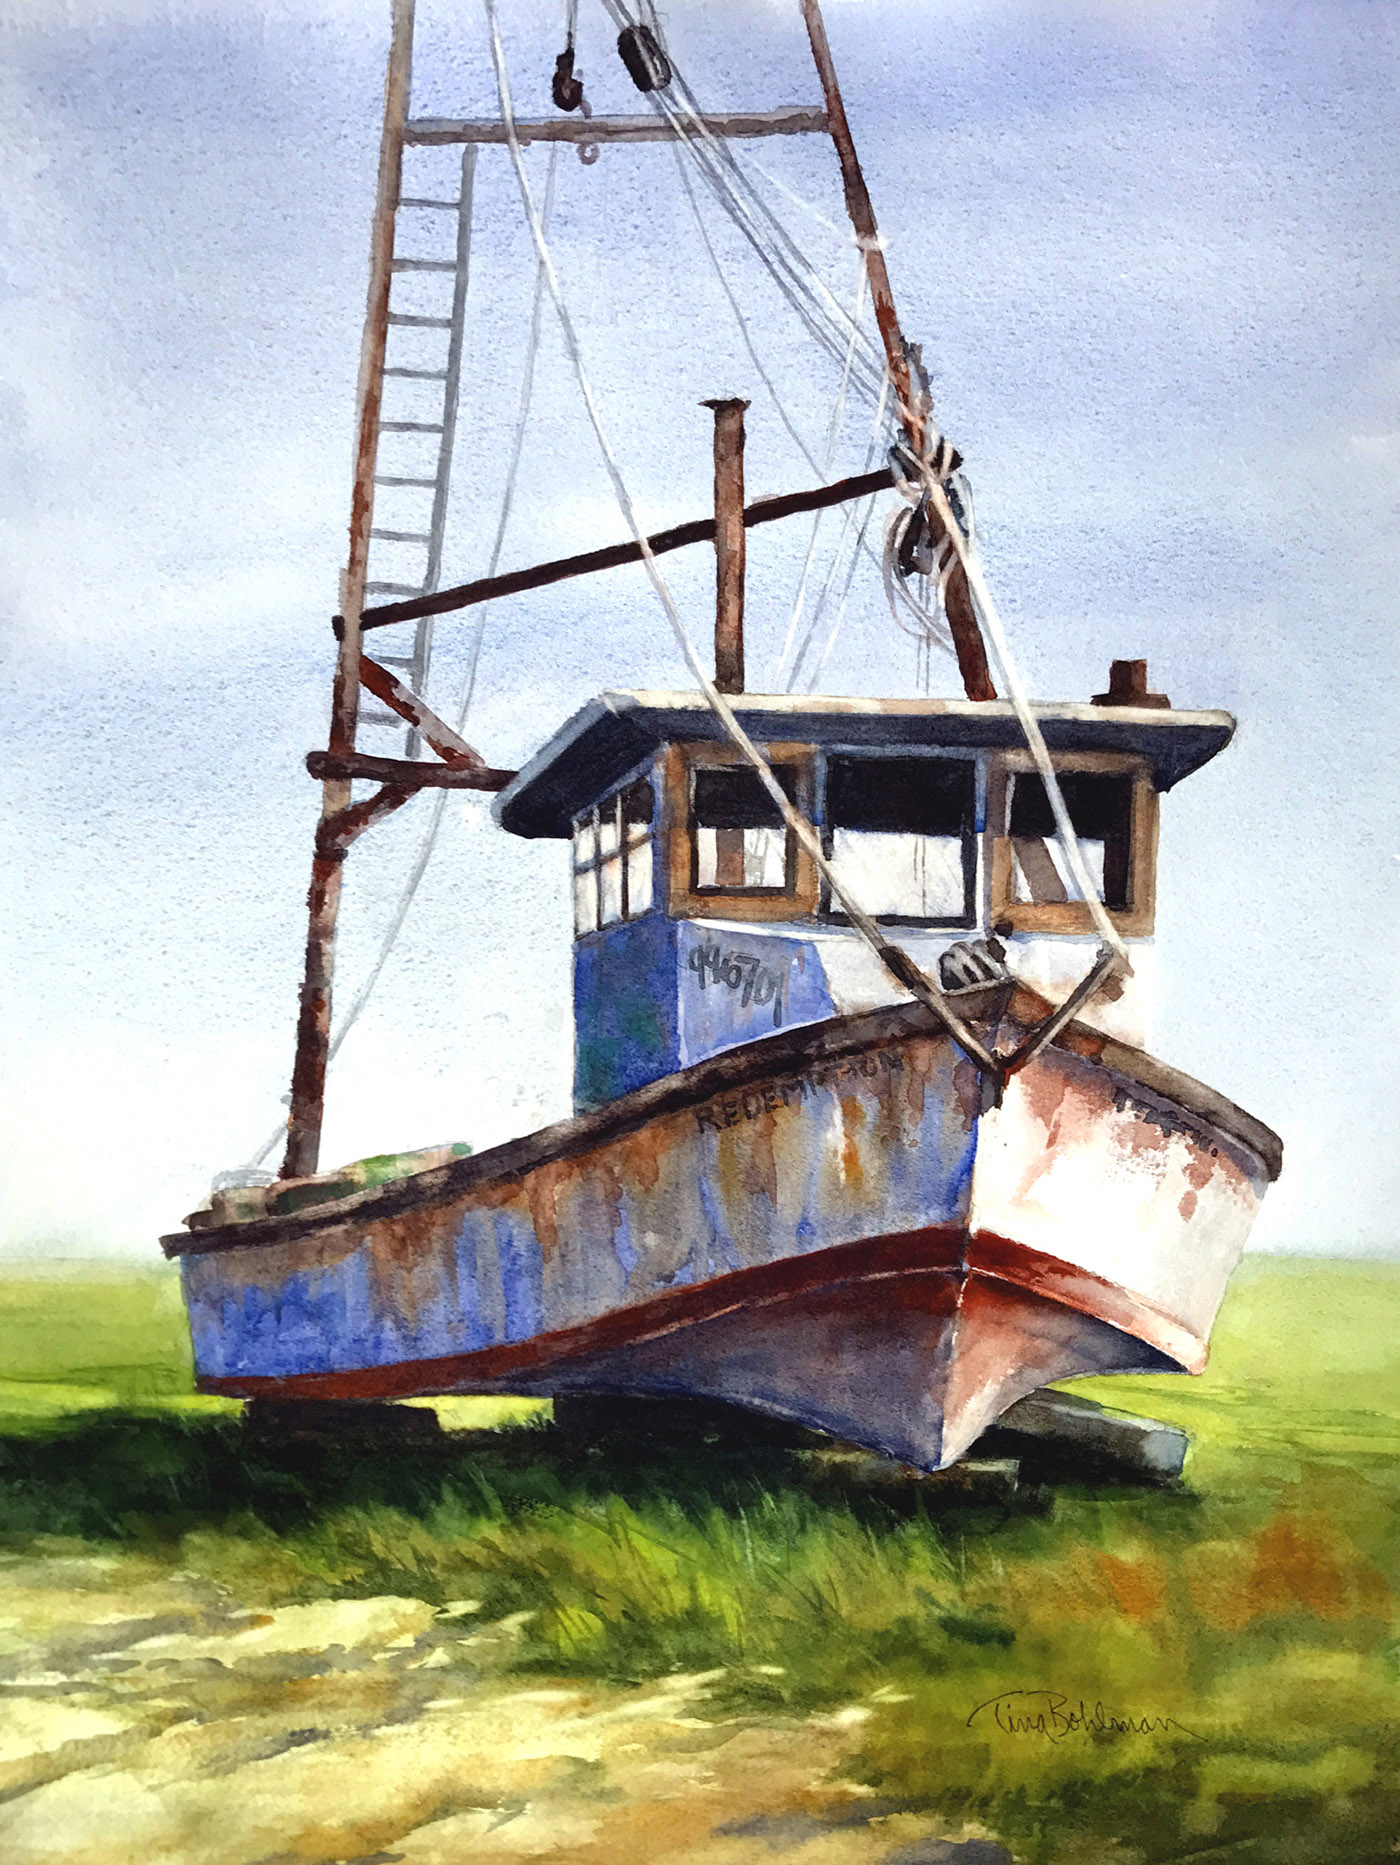 watercolor painting of a rusting boat ashore, in its resting position